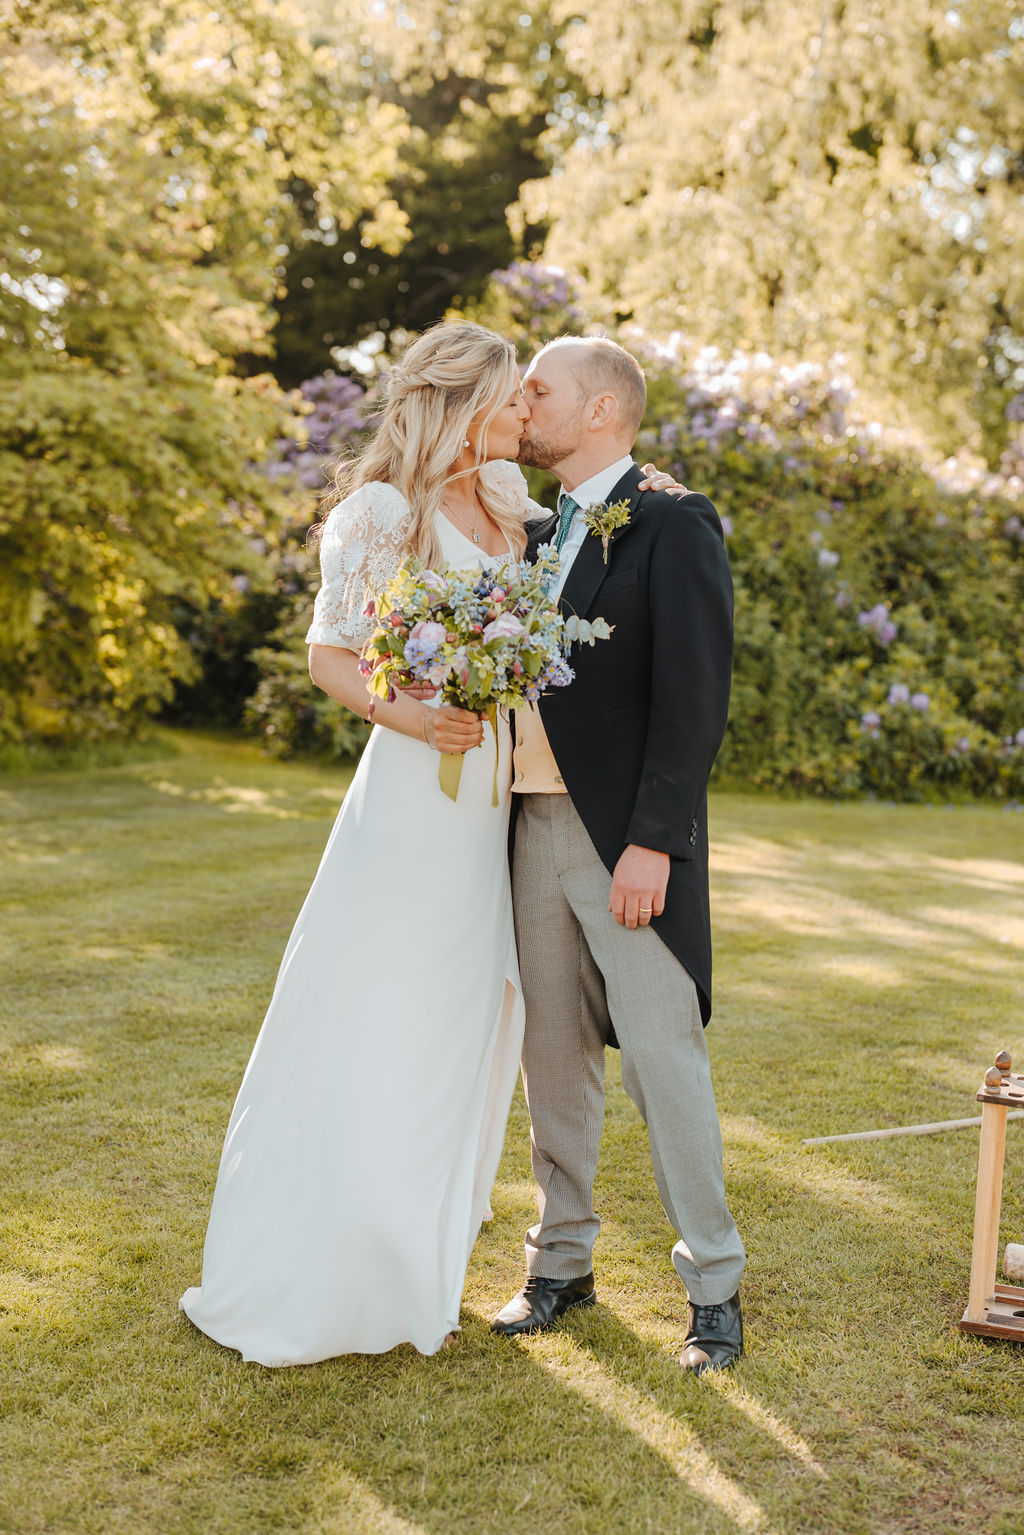 A bride and groom kiss as the groom wears a morning suit and the bride wears a long dress with lace sleeves holding a bouquet of pastel wild flowers.